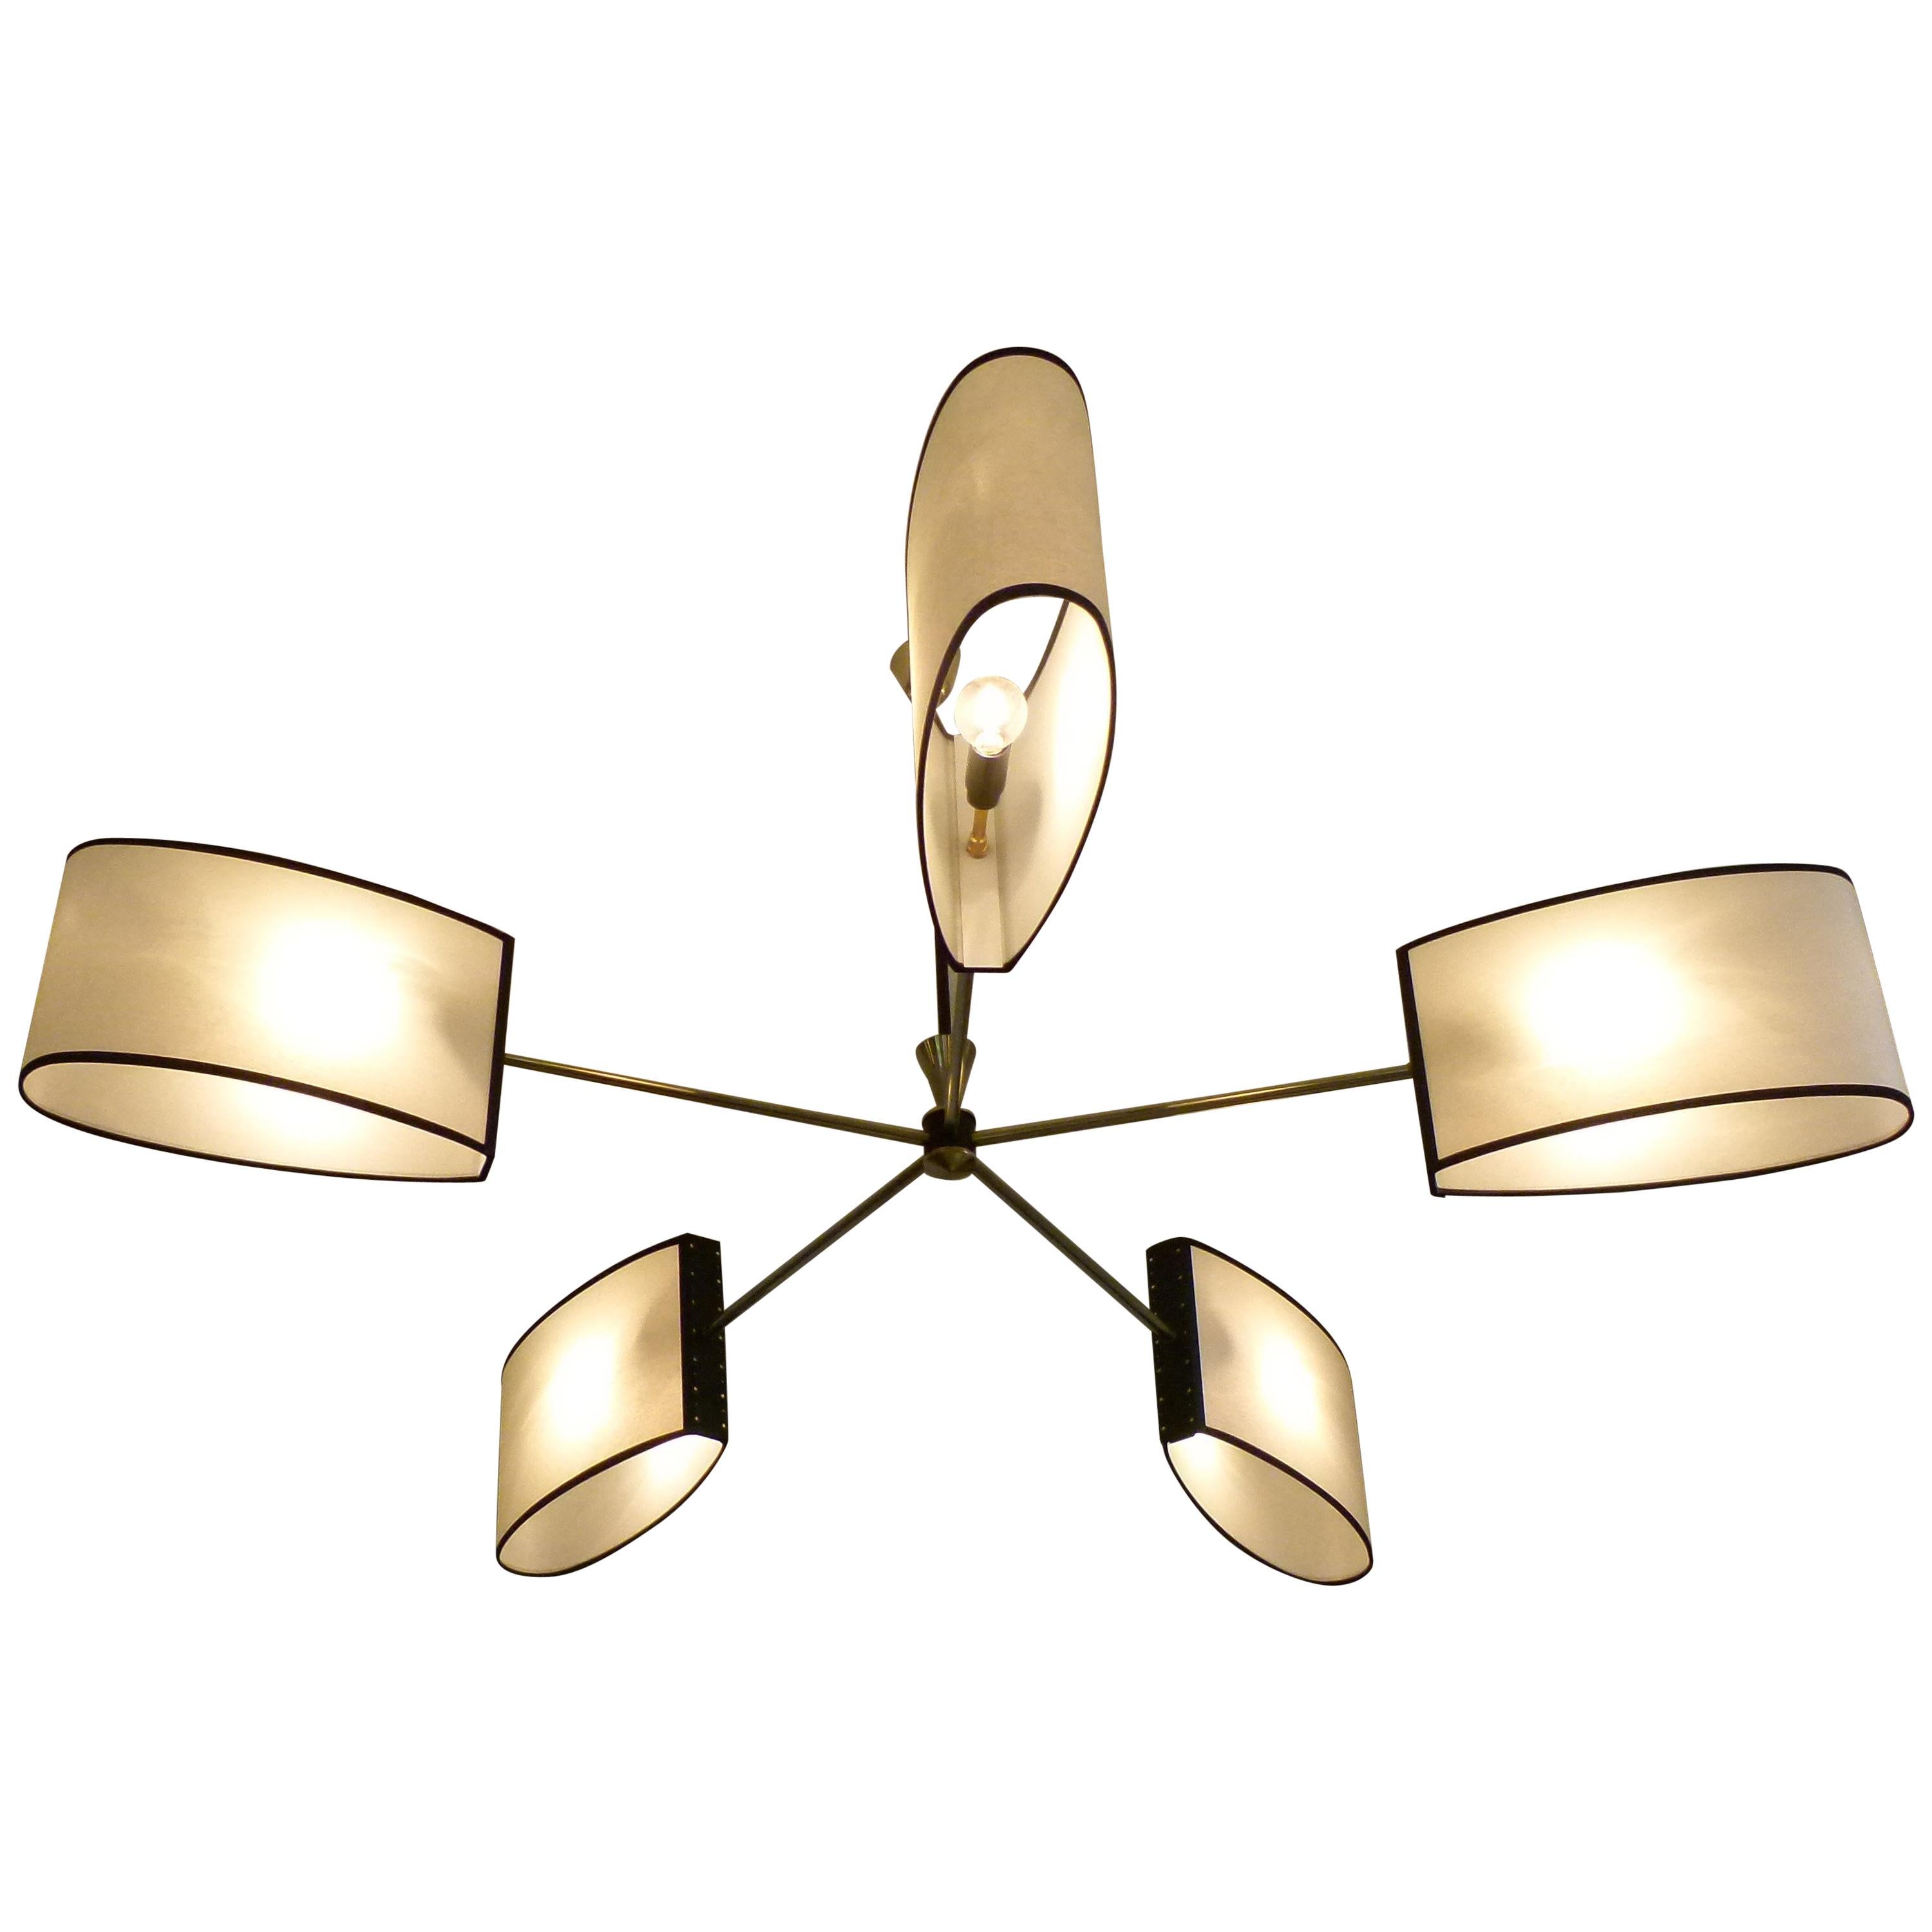 1950s Brass Chandelier with Five Lighted Arms by Maison Lunel